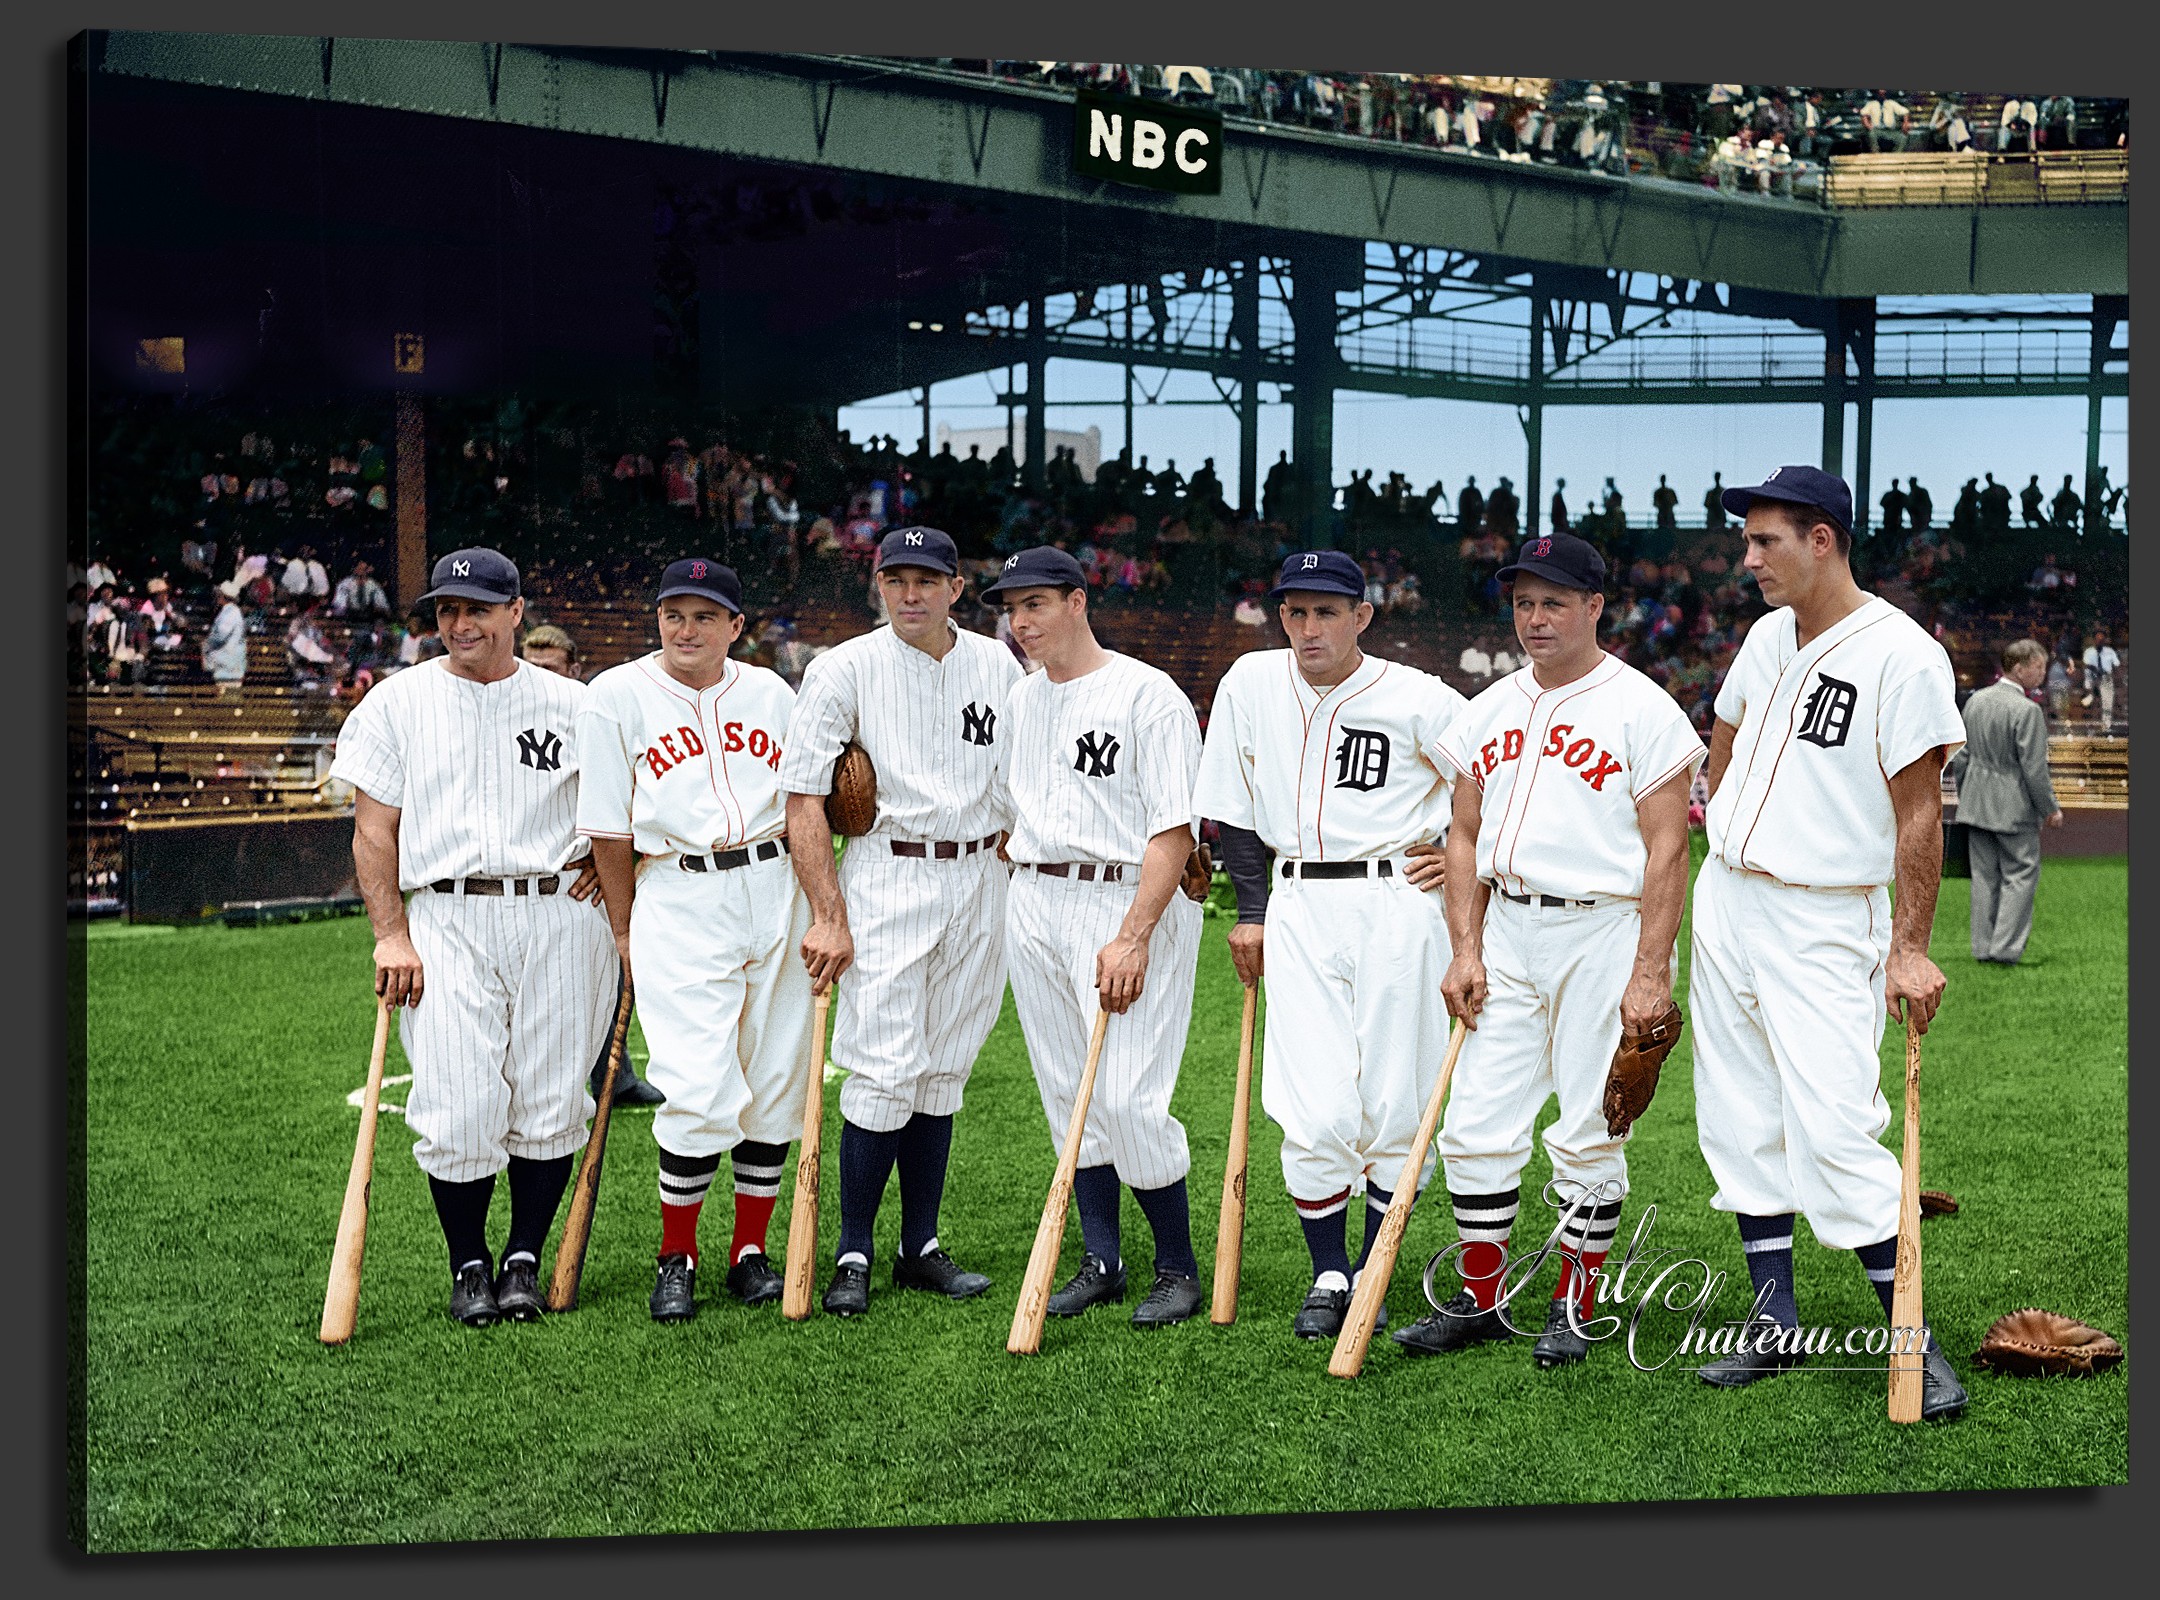 The Magnificent Seven, The 1937 All-Star Players